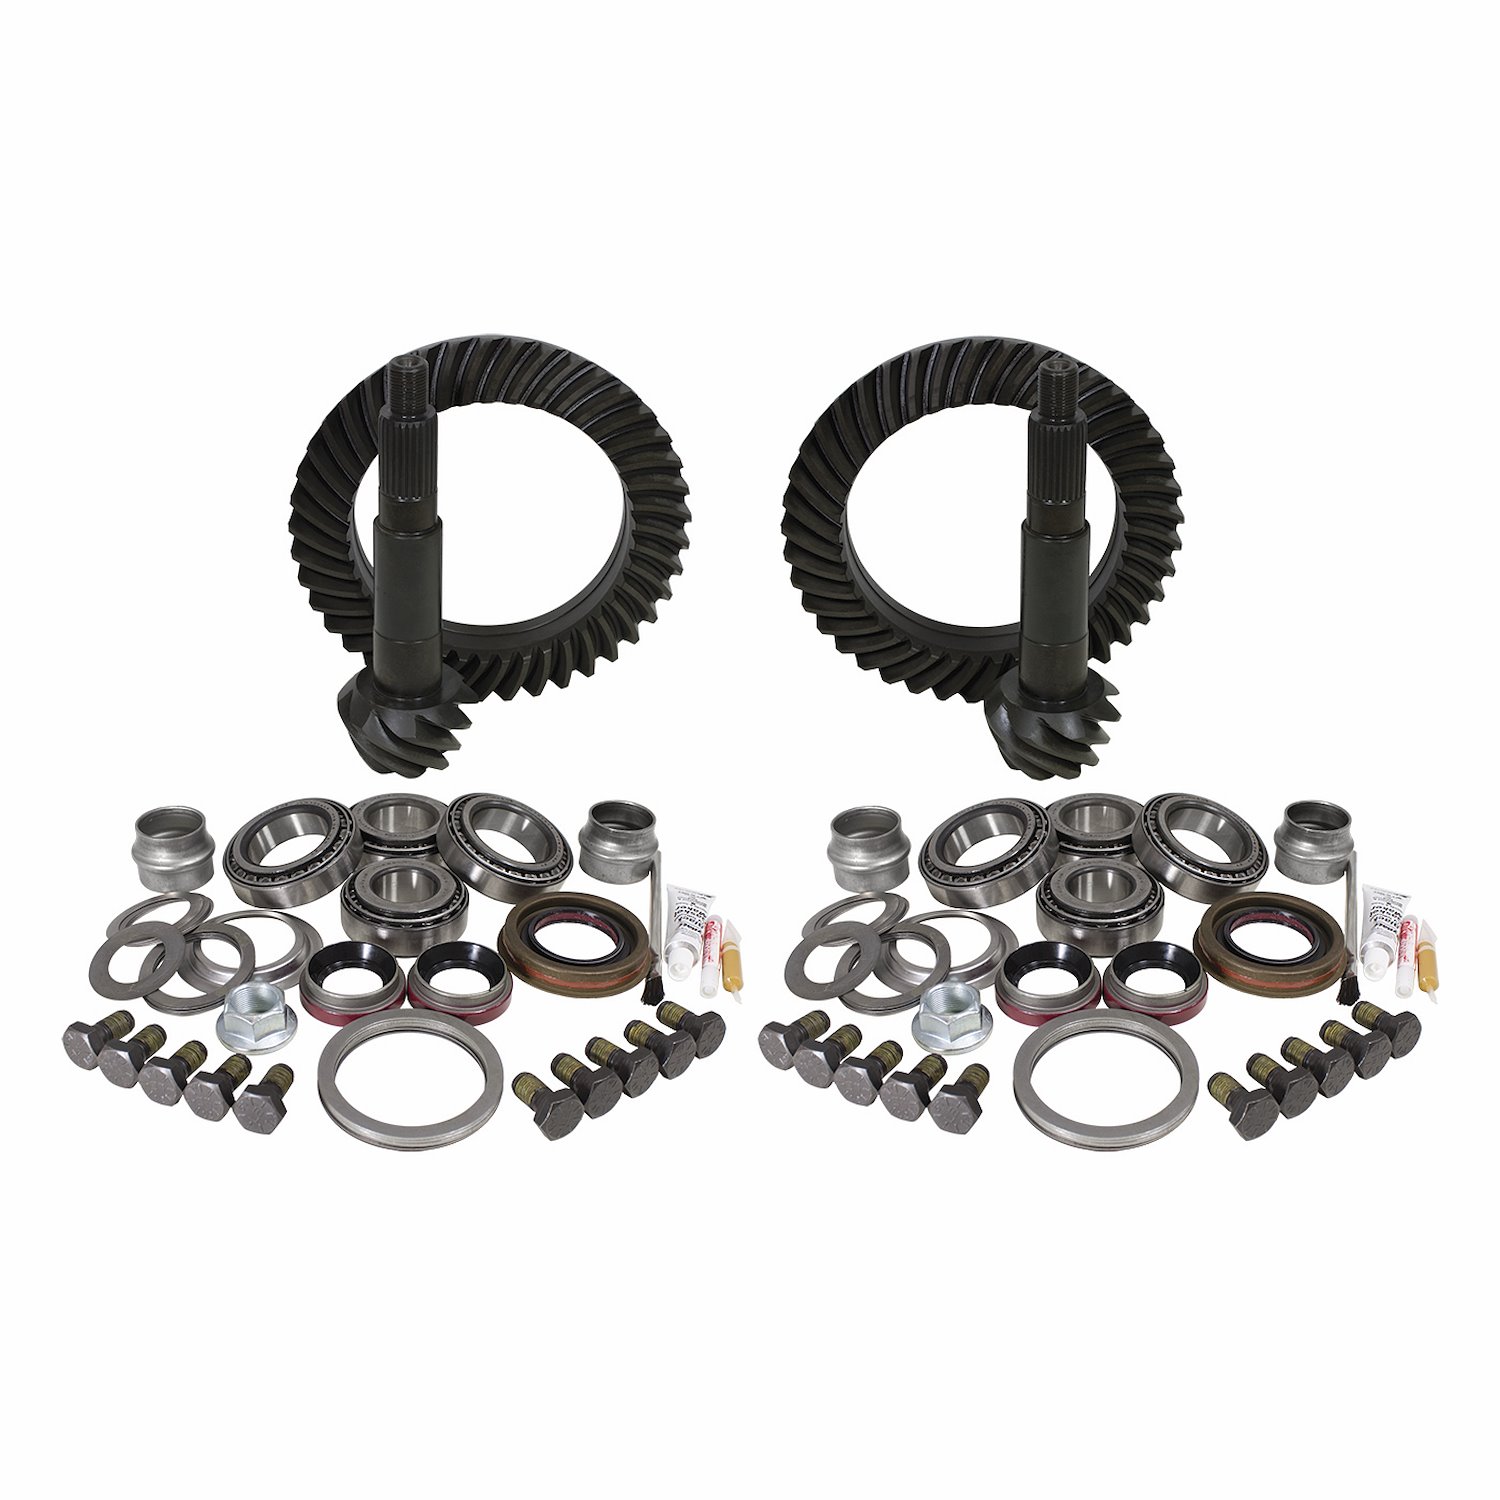 USA Standard ZGK010 Gear & Install Kit Package, For Jeep Tj Rubicon, 4.88 Ratio